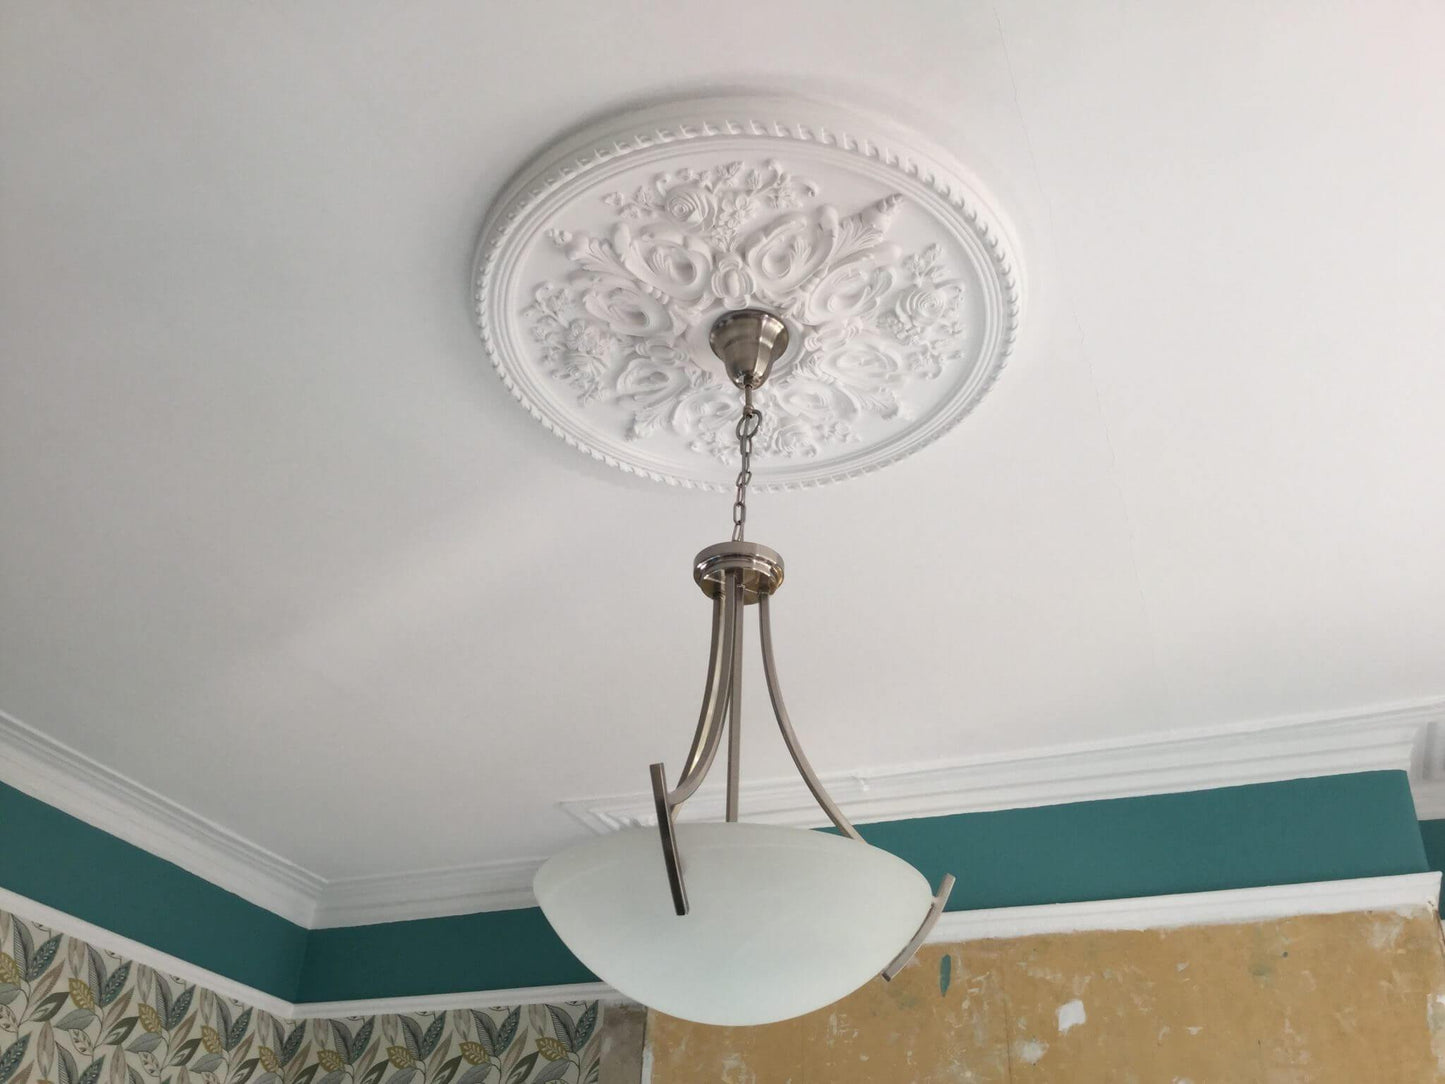 B3015 - Ceiling Rose installed with a light